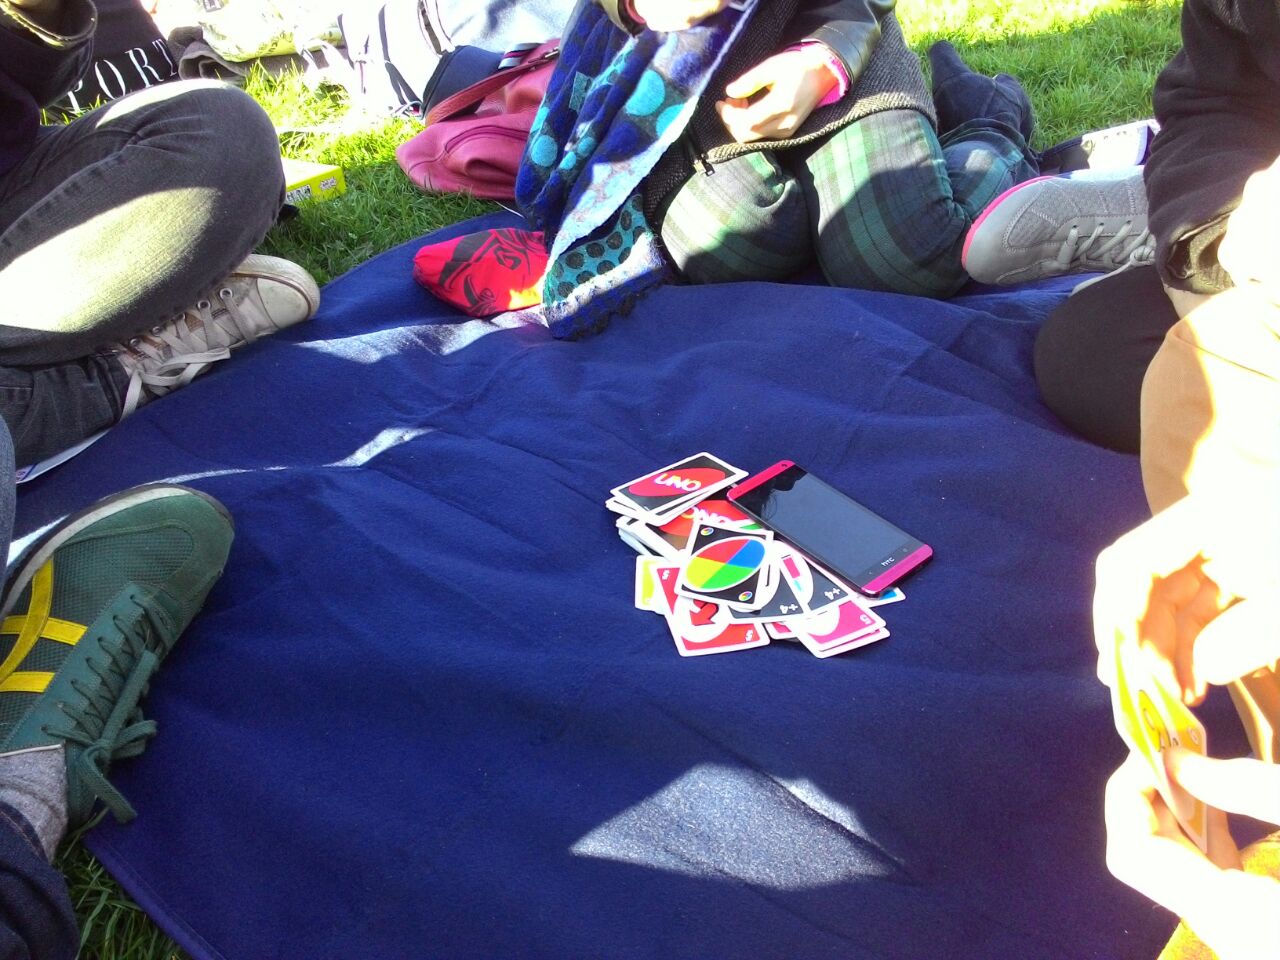 Playing Uno